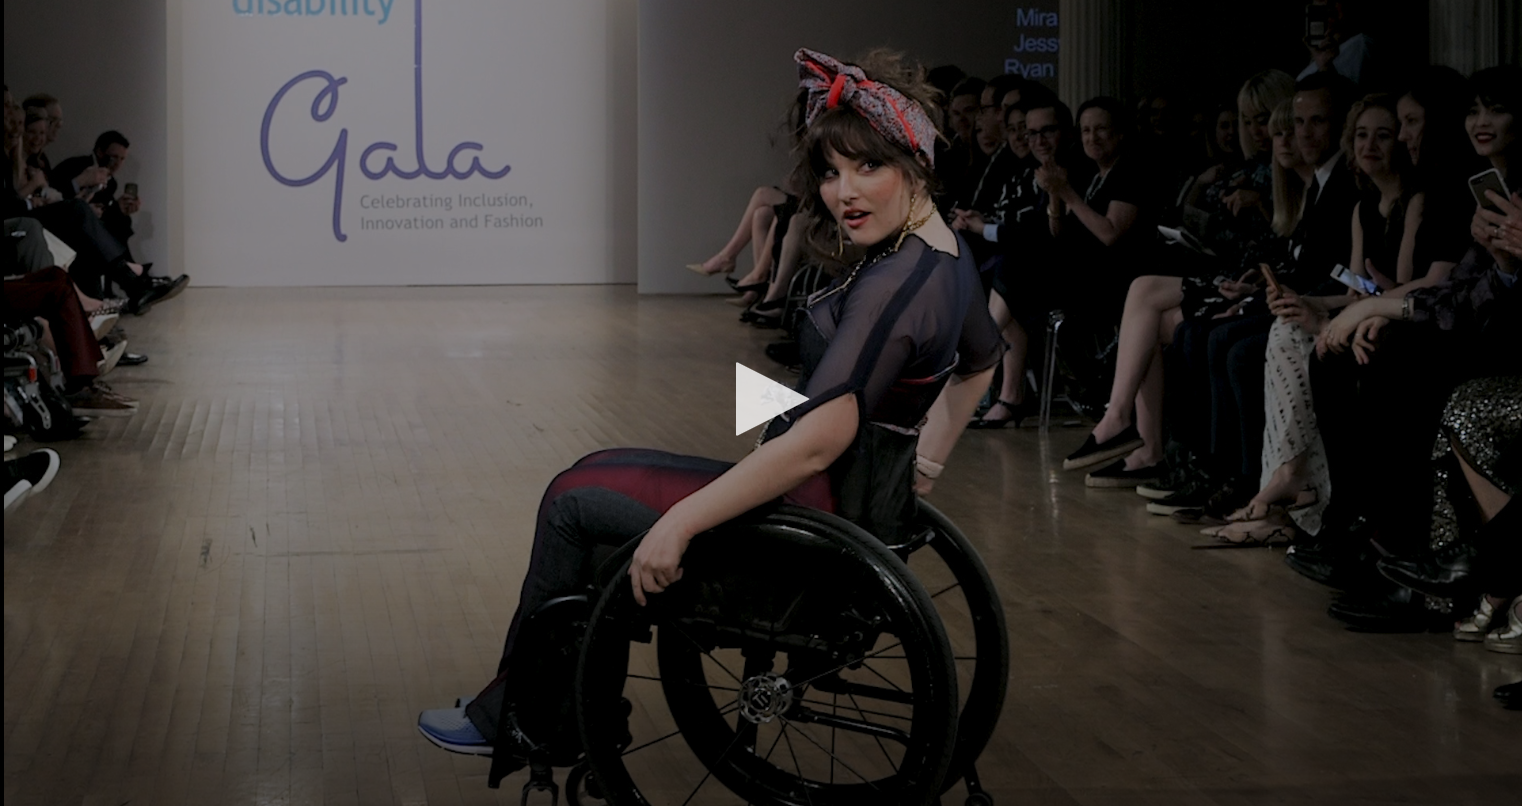 ‘Design for Disability’ Changes the Fashion Game for People With Disabilities (video)